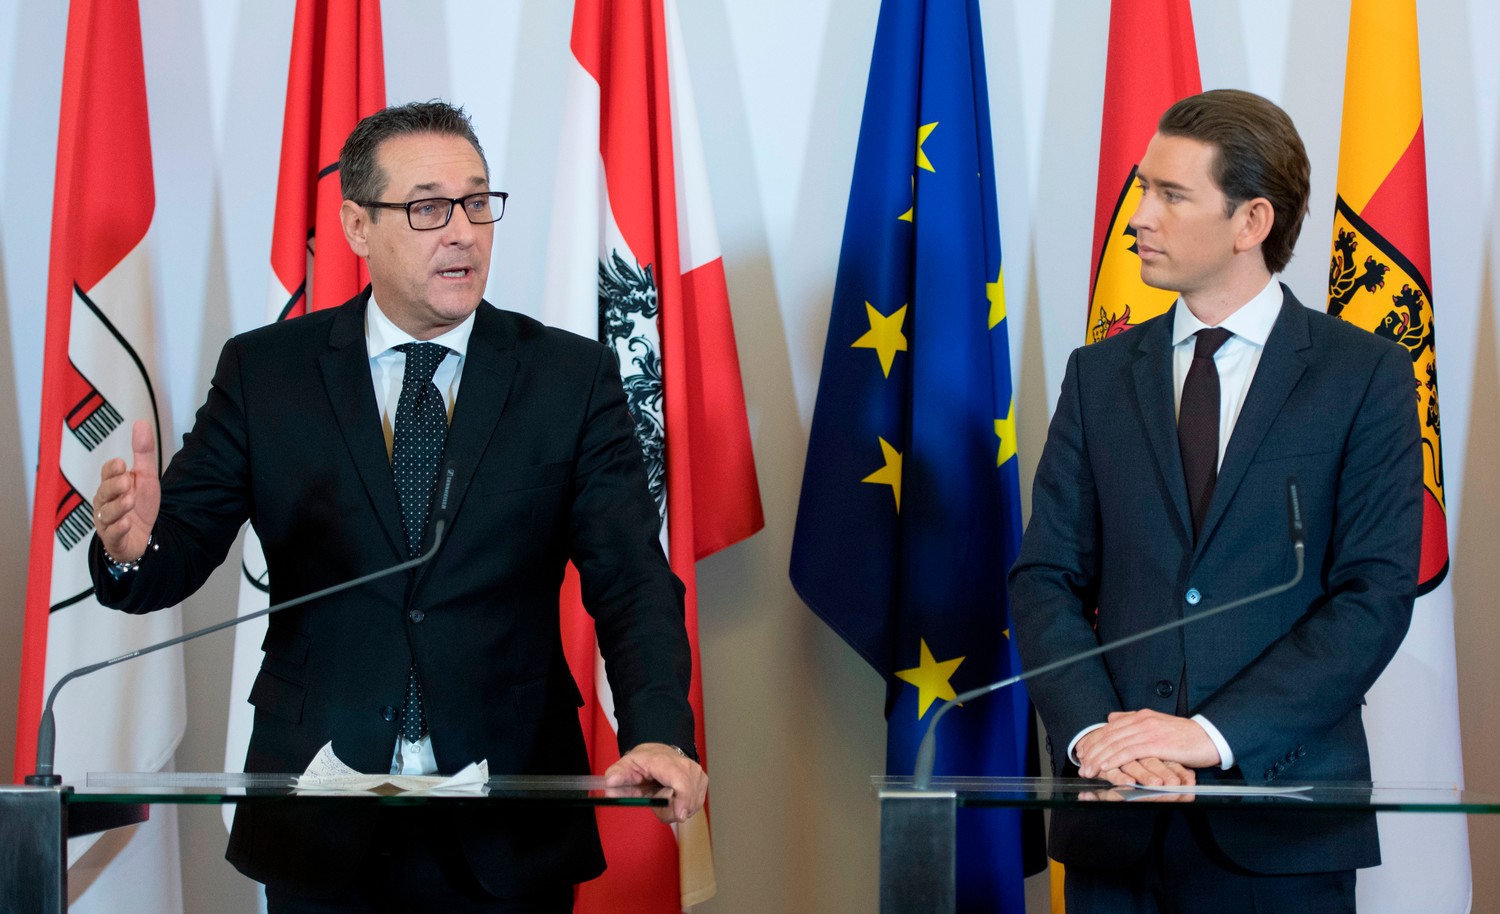 Chancellor Sebastian Kurz, right, of the Austrian People’s Party and Vice Chancellor Heinz-Christian Strache of the Freedom Party, after their first Cabinet meeting on Dec. 19, 2017.